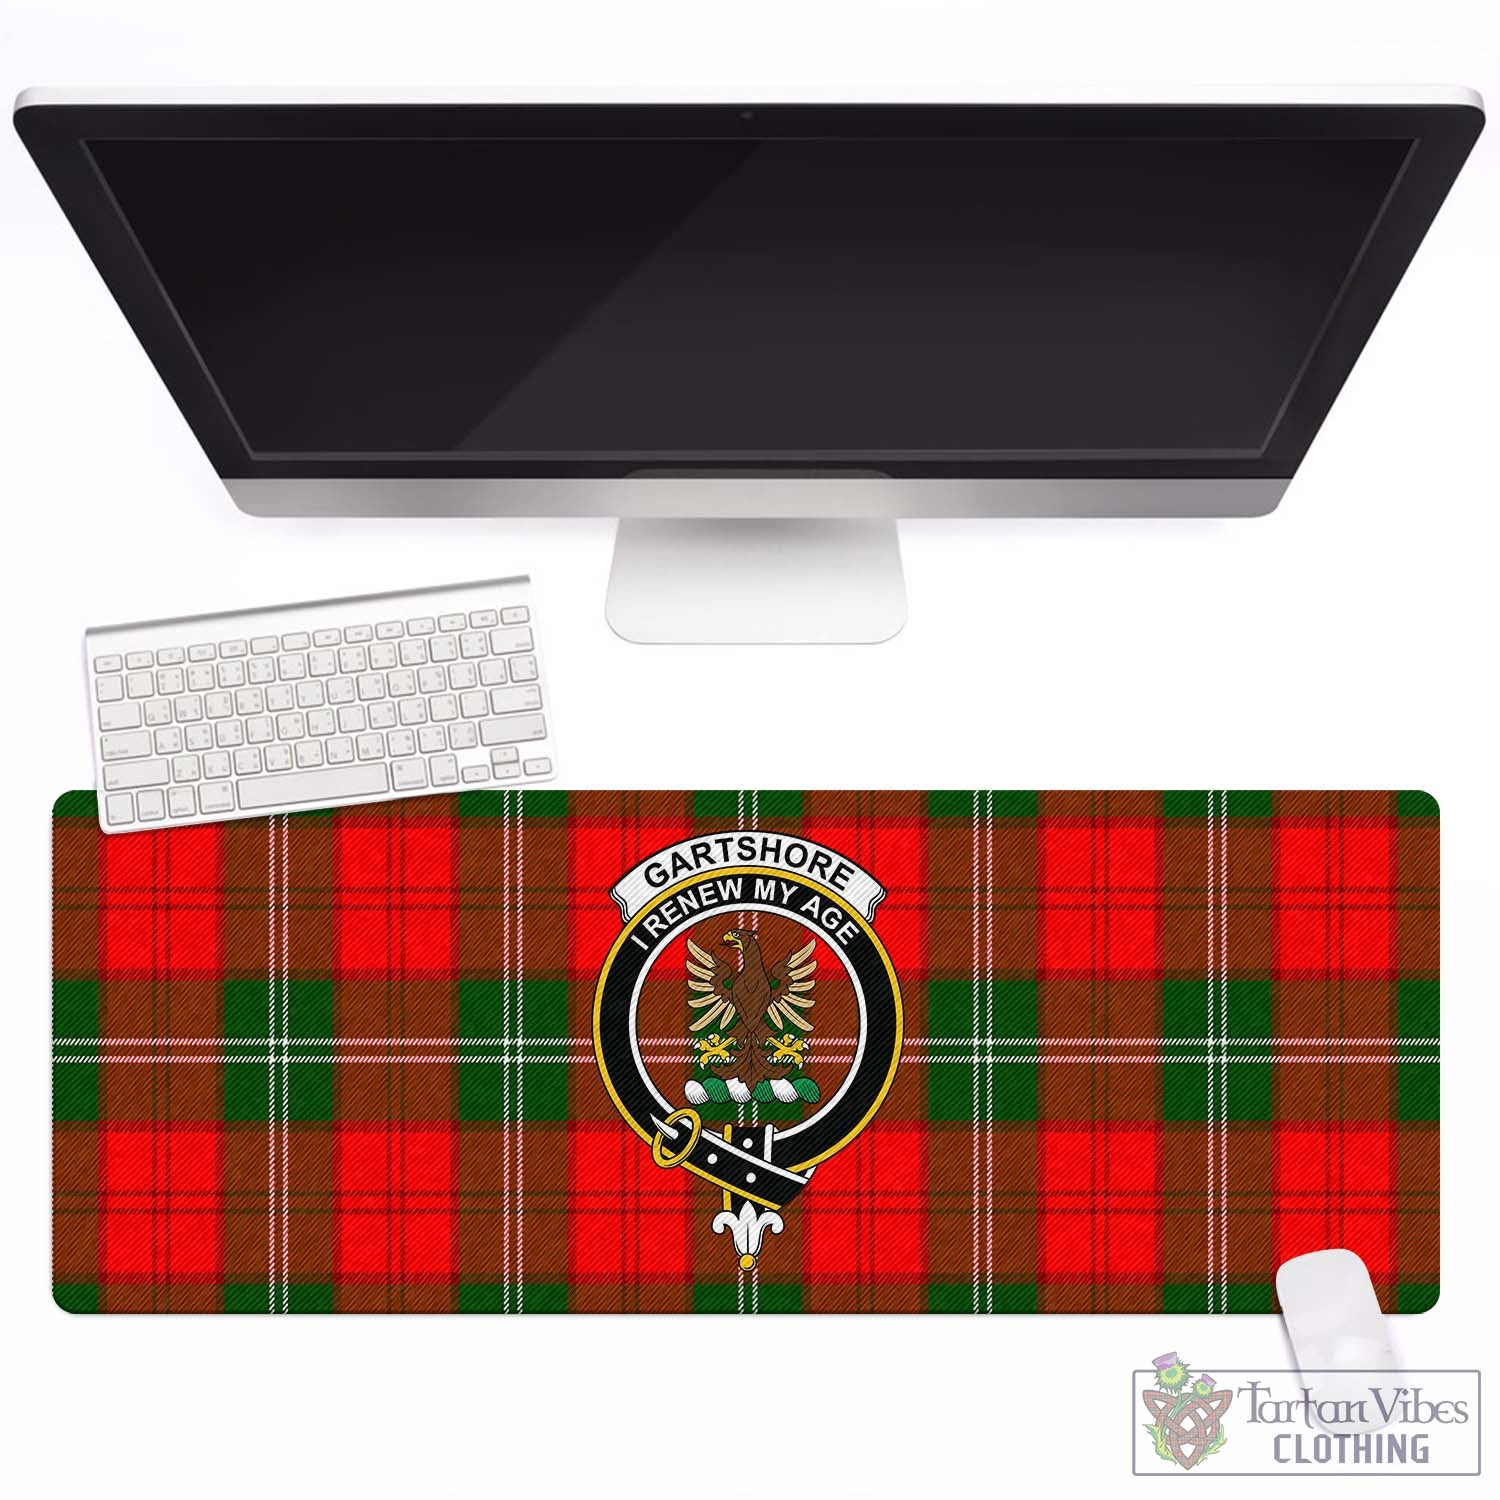 Tartan Vibes Clothing Gartshore Tartan Mouse Pad with Family Crest